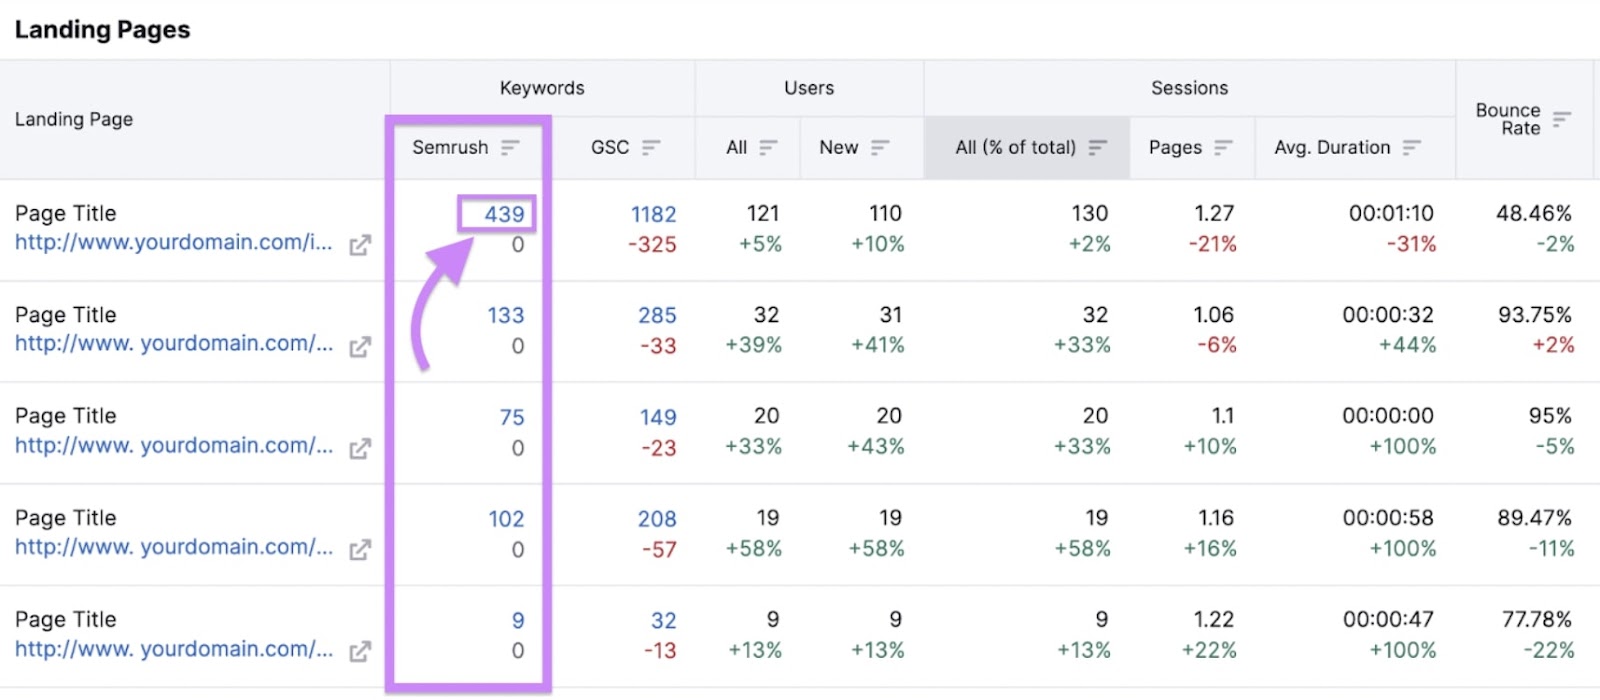 "Semrush" column highlighted in the "Landing Pages" table